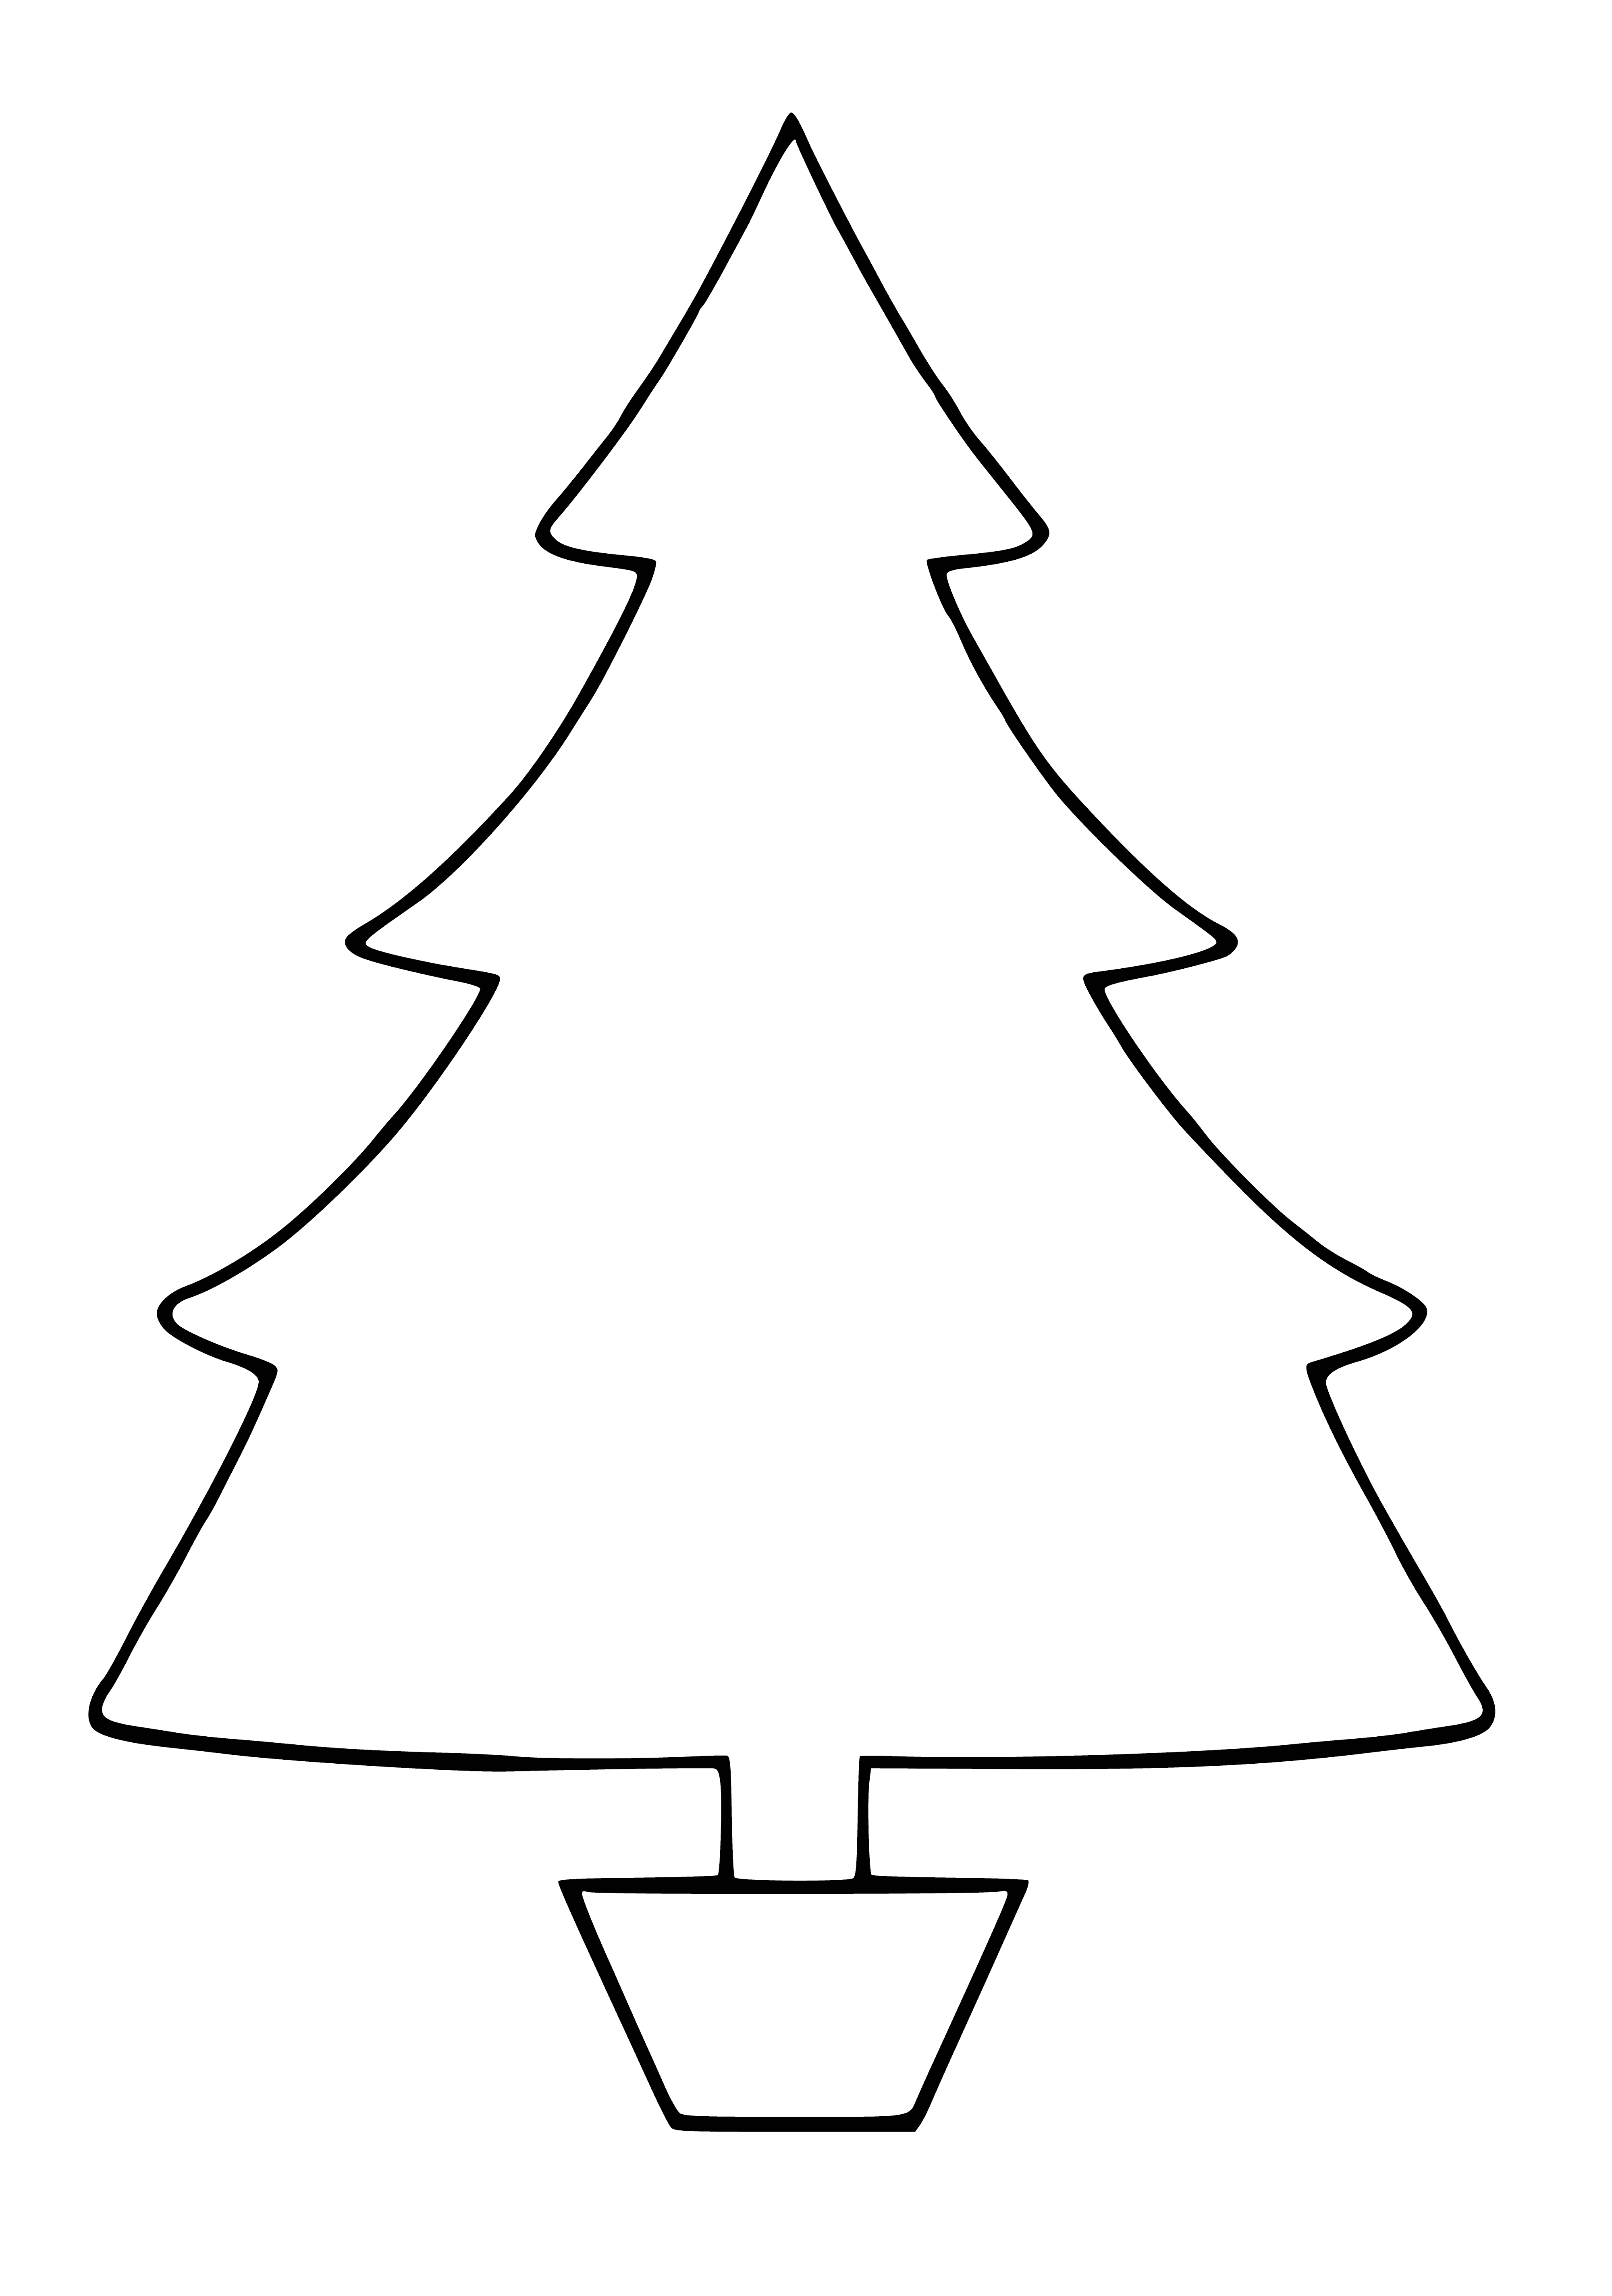 coloring page: Coloring pages of jolly Christmas trees decorated with balls, garland, and presents; night sky with stars in background.